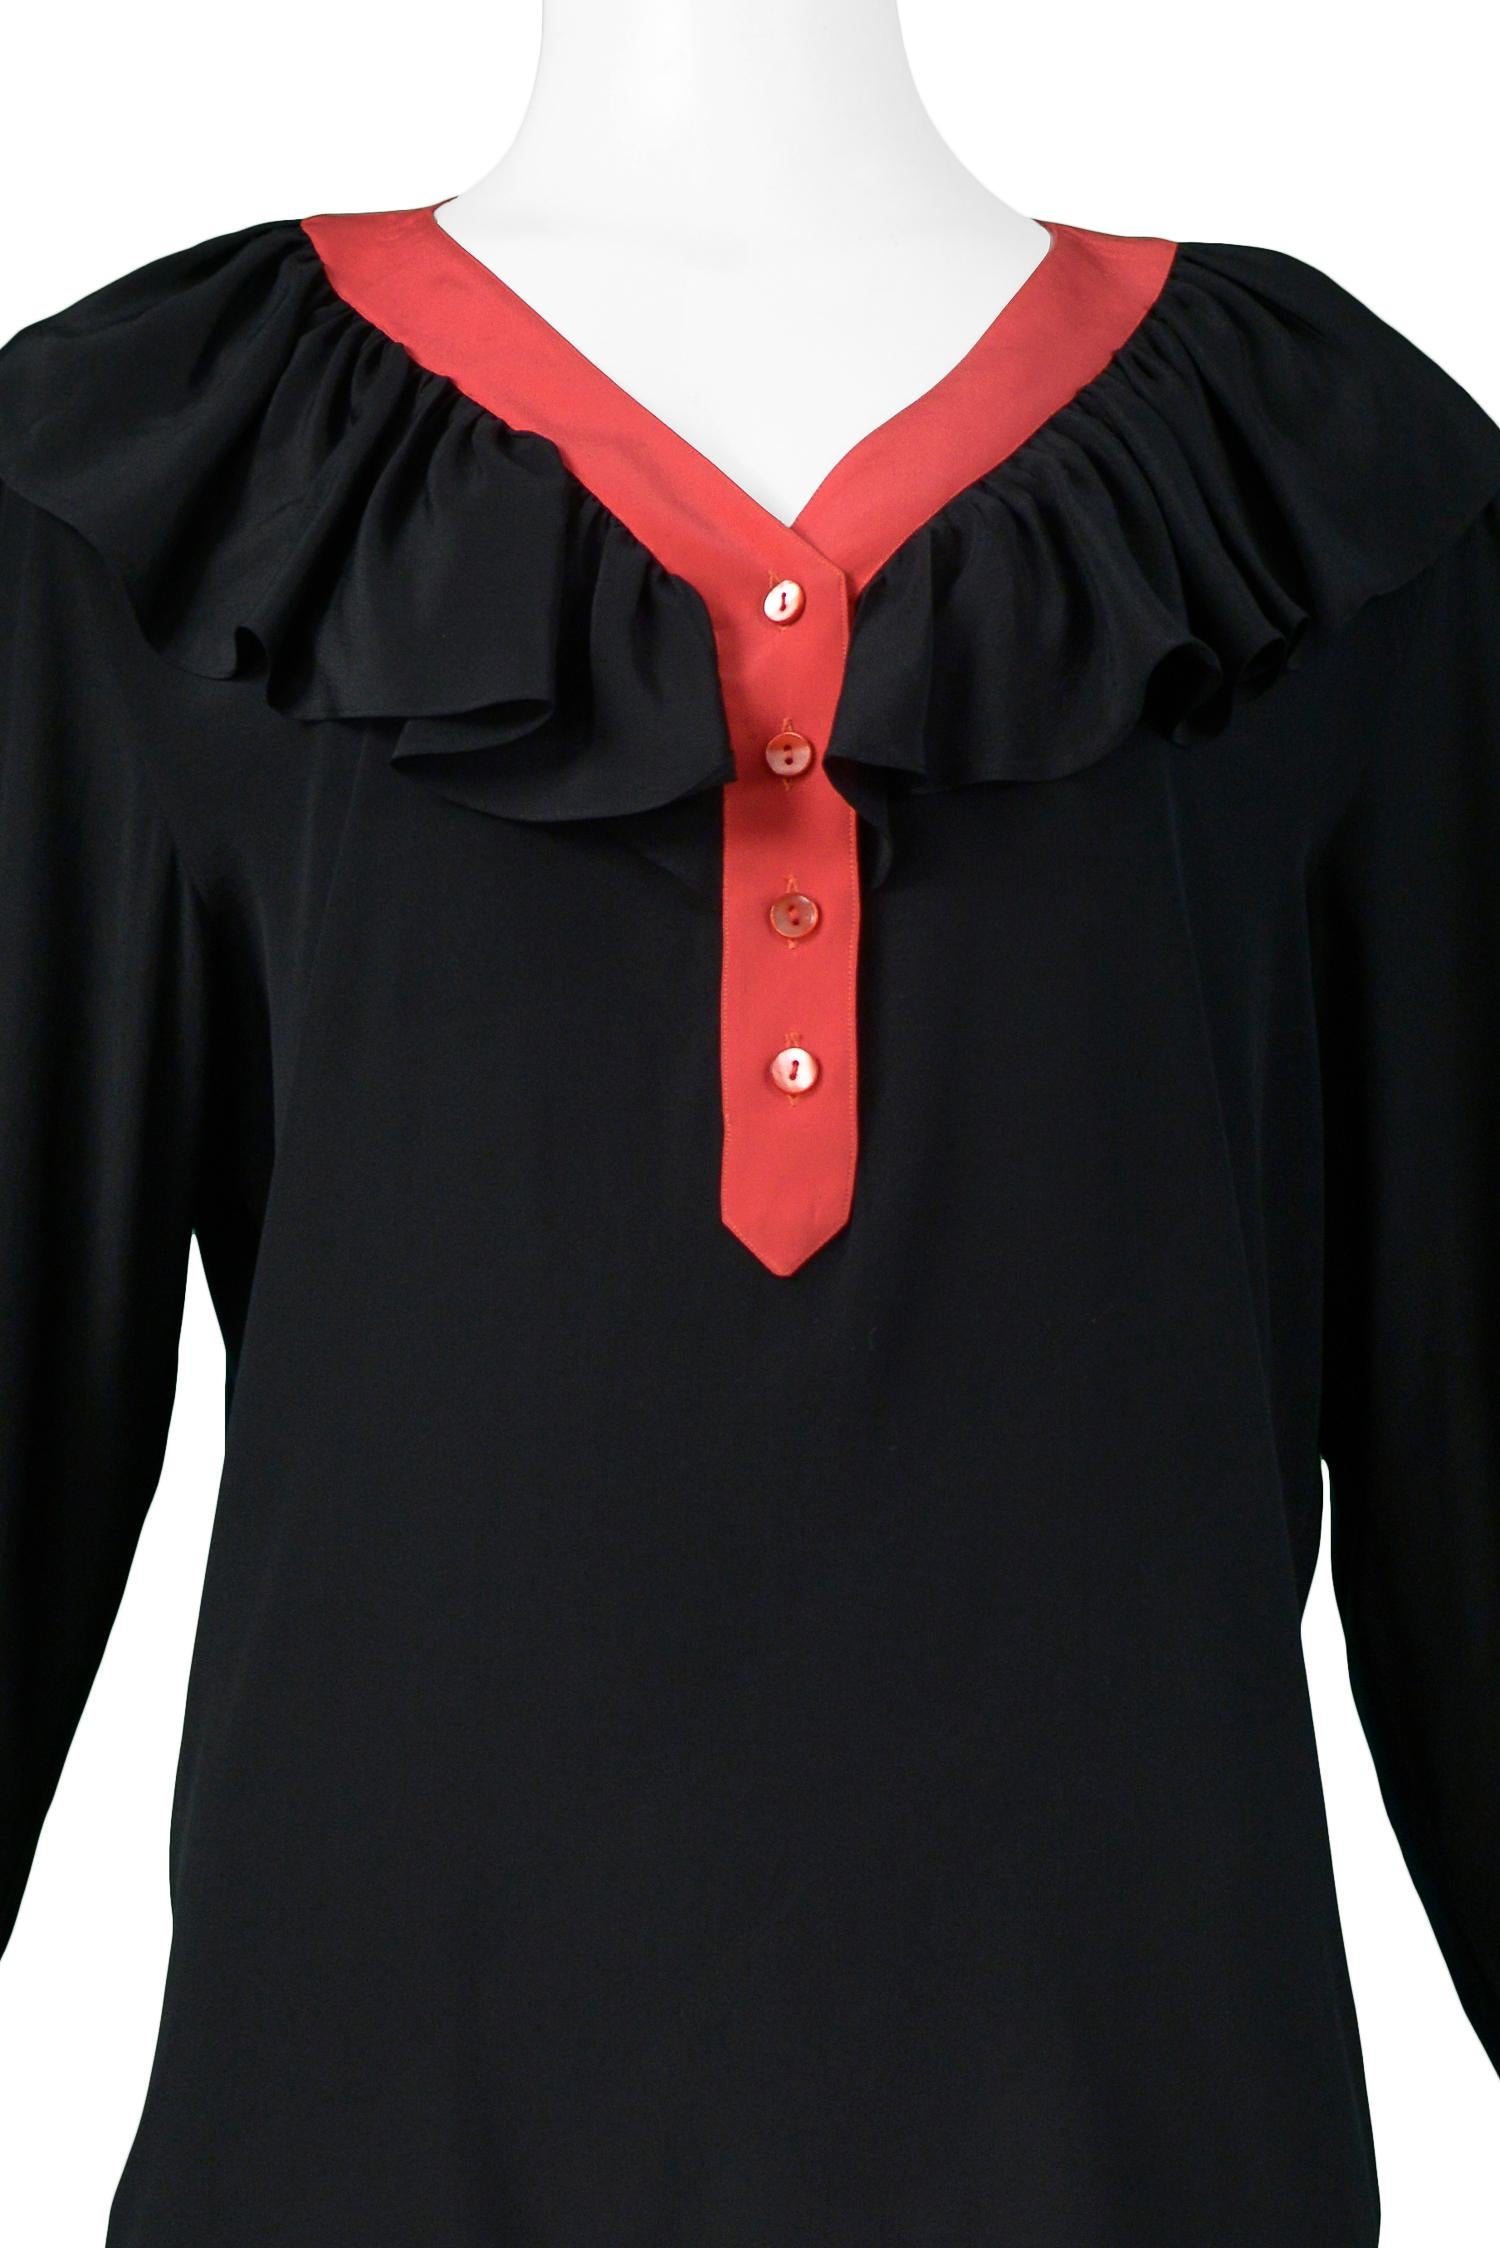 Vintage Yves Saint Laurent Black & Red Silk Ruffle Blousew In Excellent Condition For Sale In Los Angeles, CA